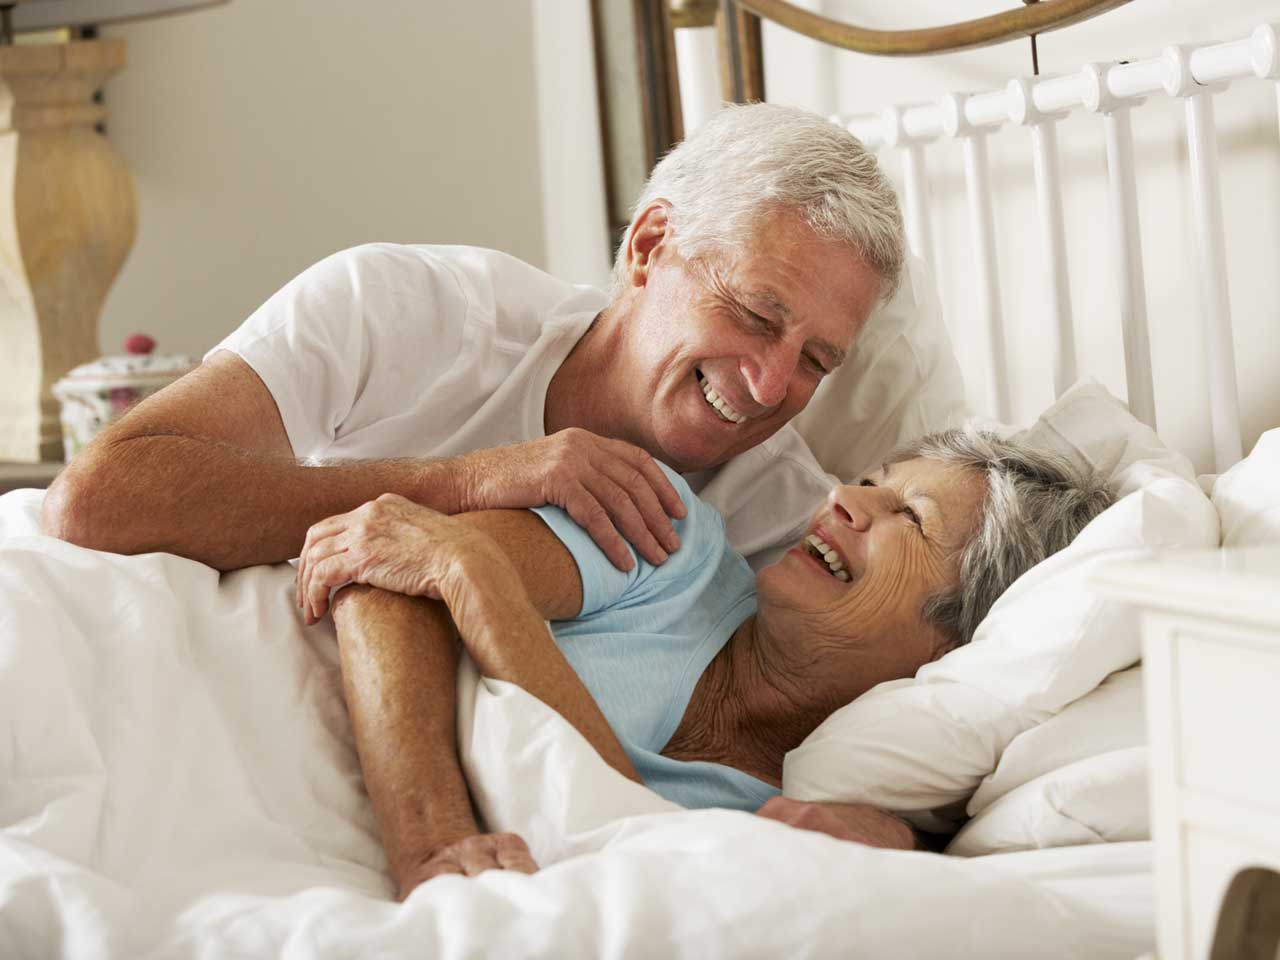 Sex over 60 - Risks, Benefits & Sex Tips for Over Sixties - Saga